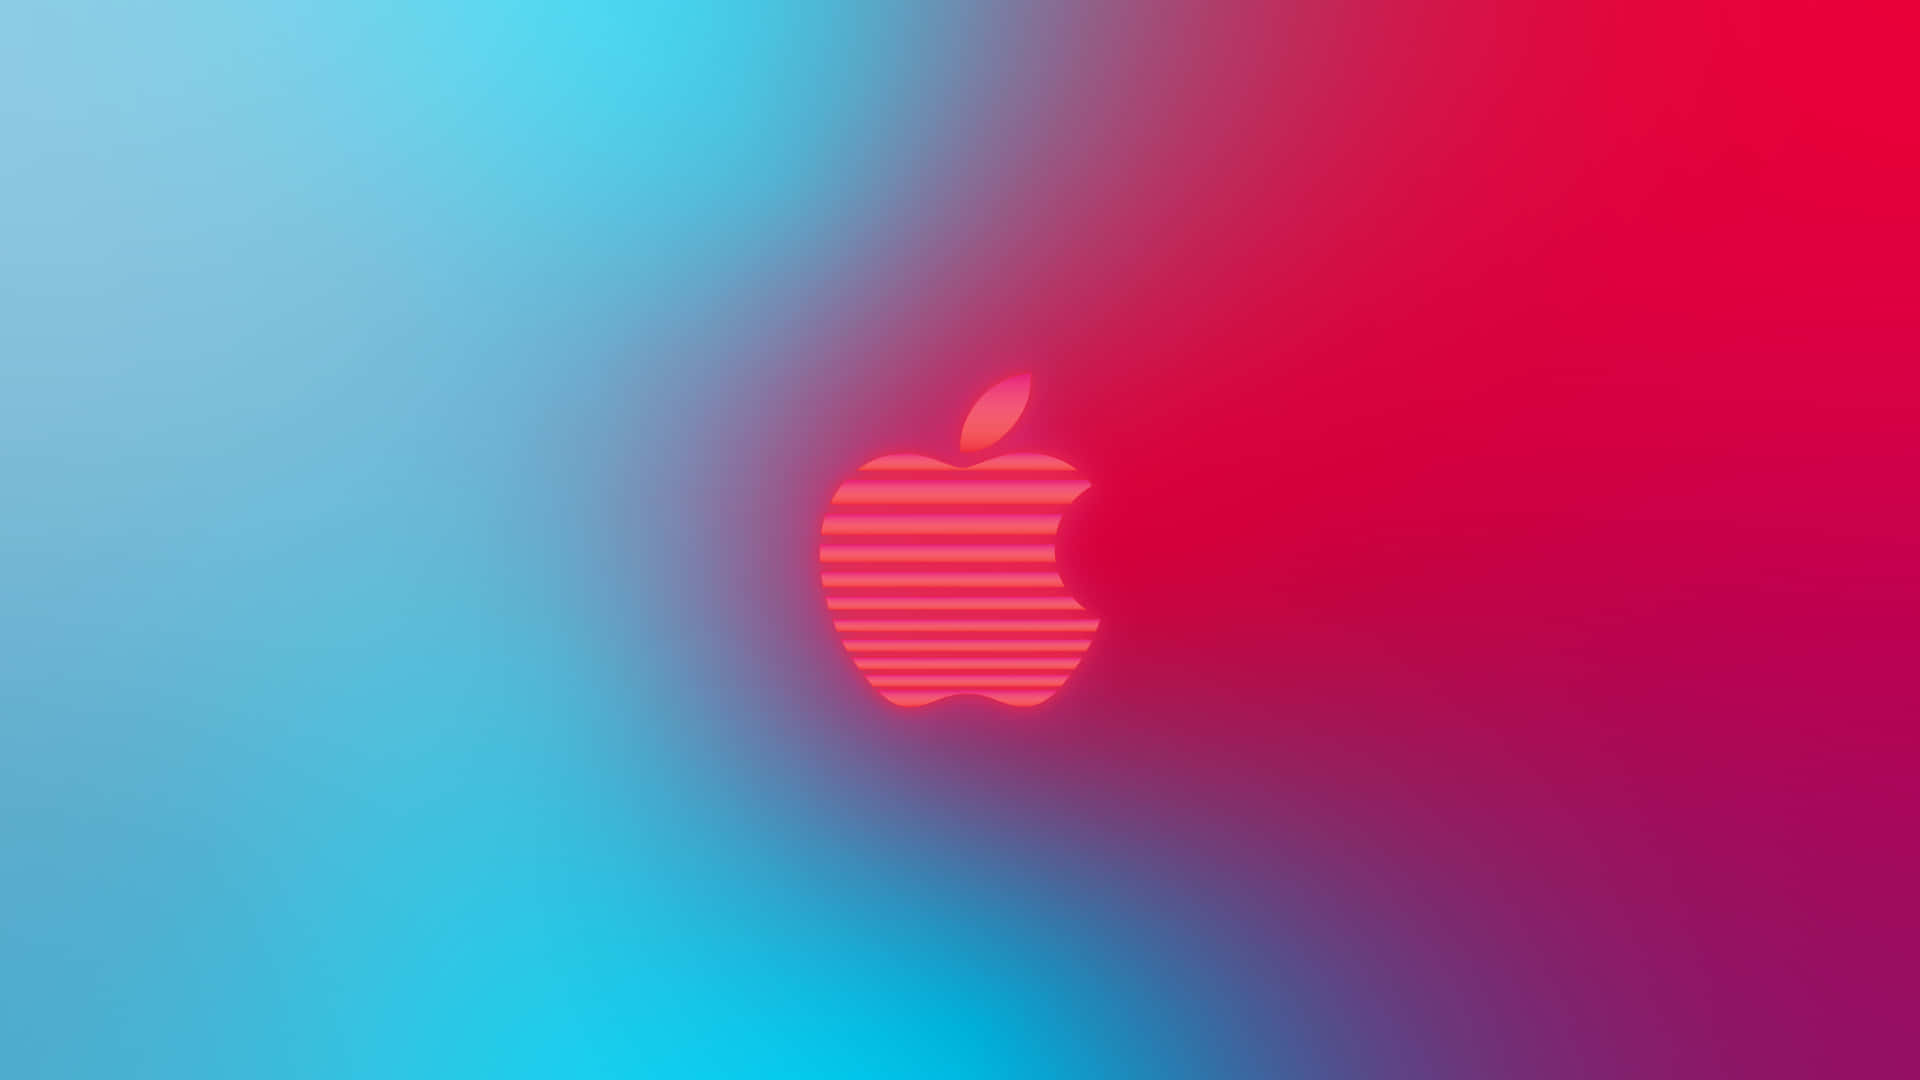 The Latest And Greatest From Apple: The 4K Wallpaper